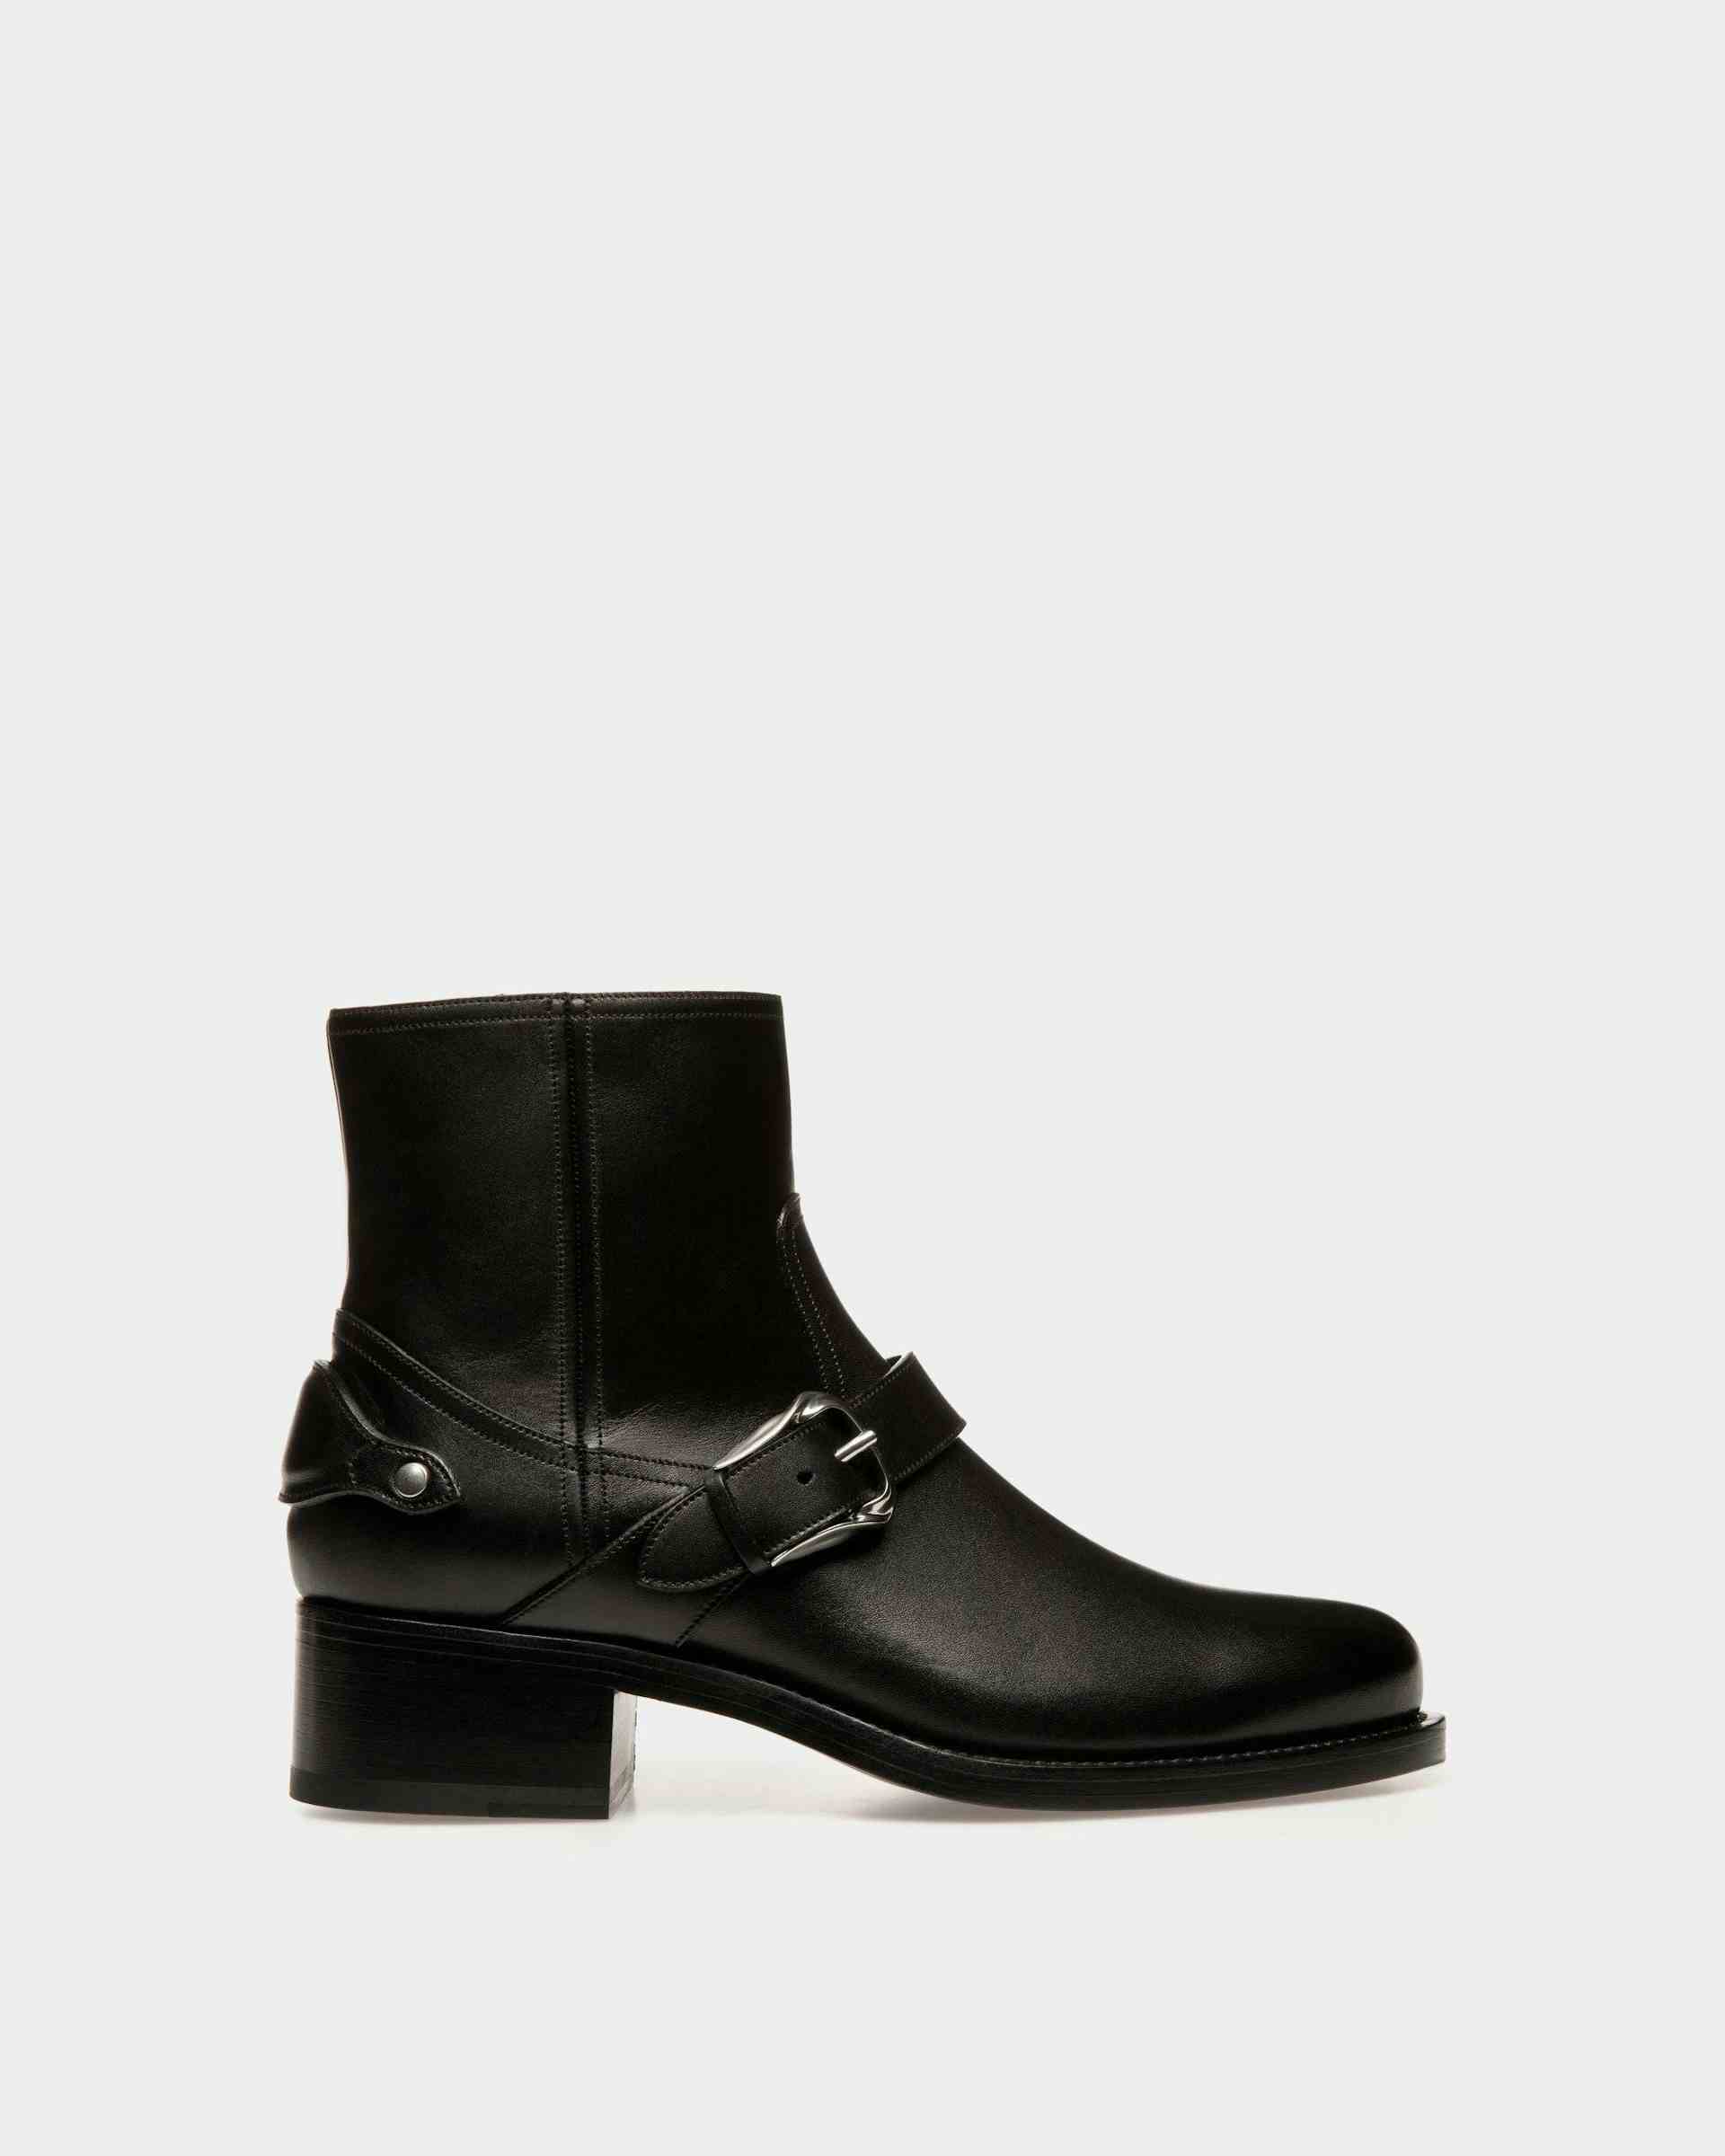 Arley Long Boots In Black Leather - Men's - Bally